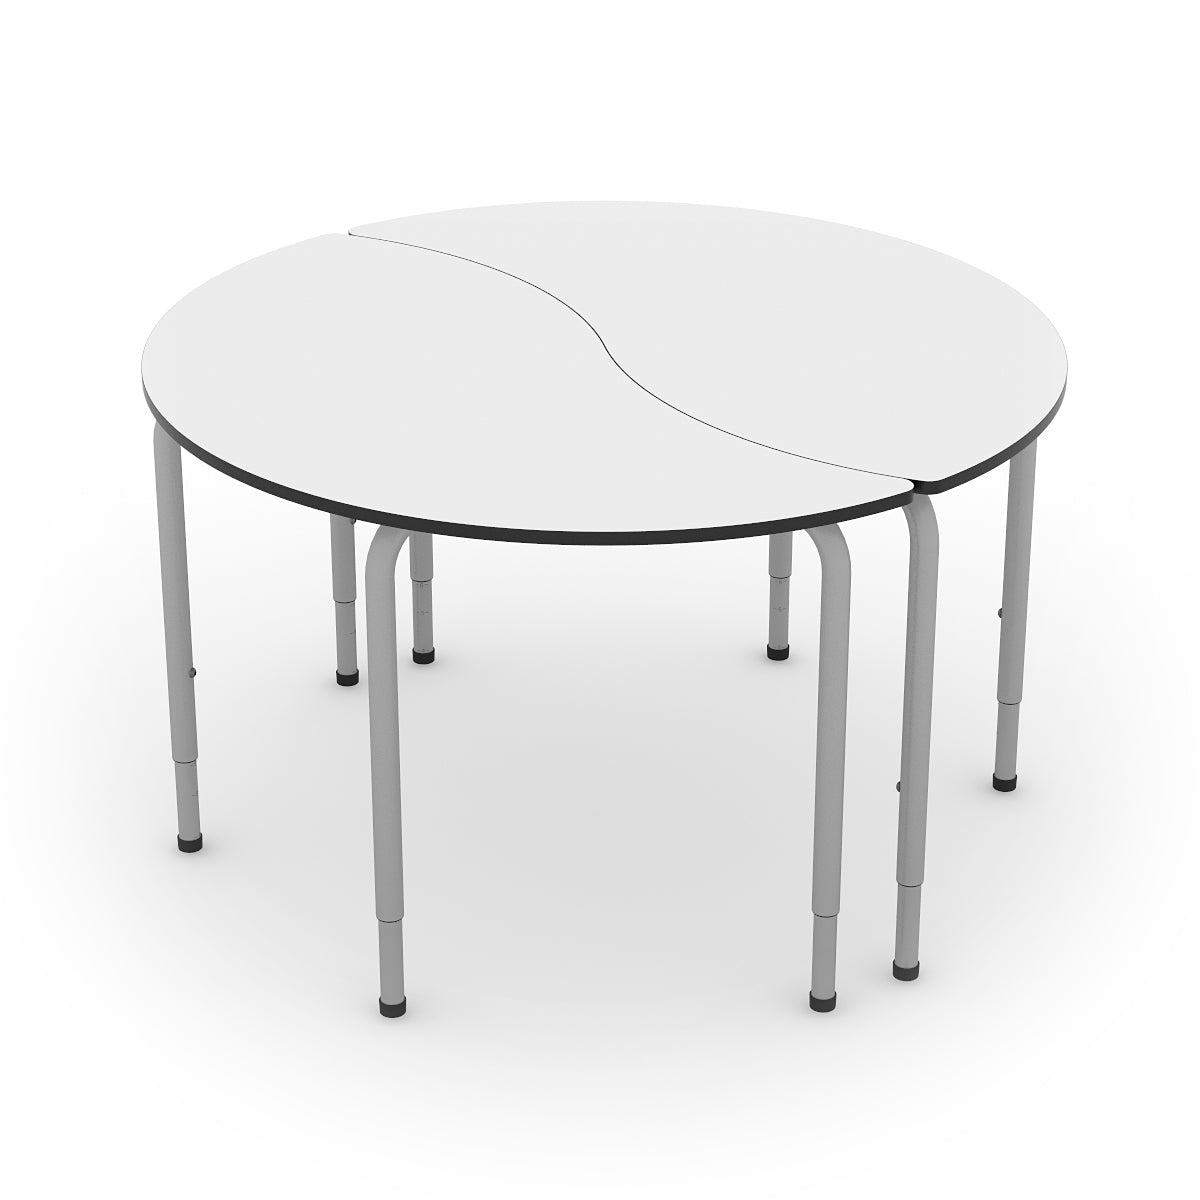 Synergy Yang Height Adjustable Table